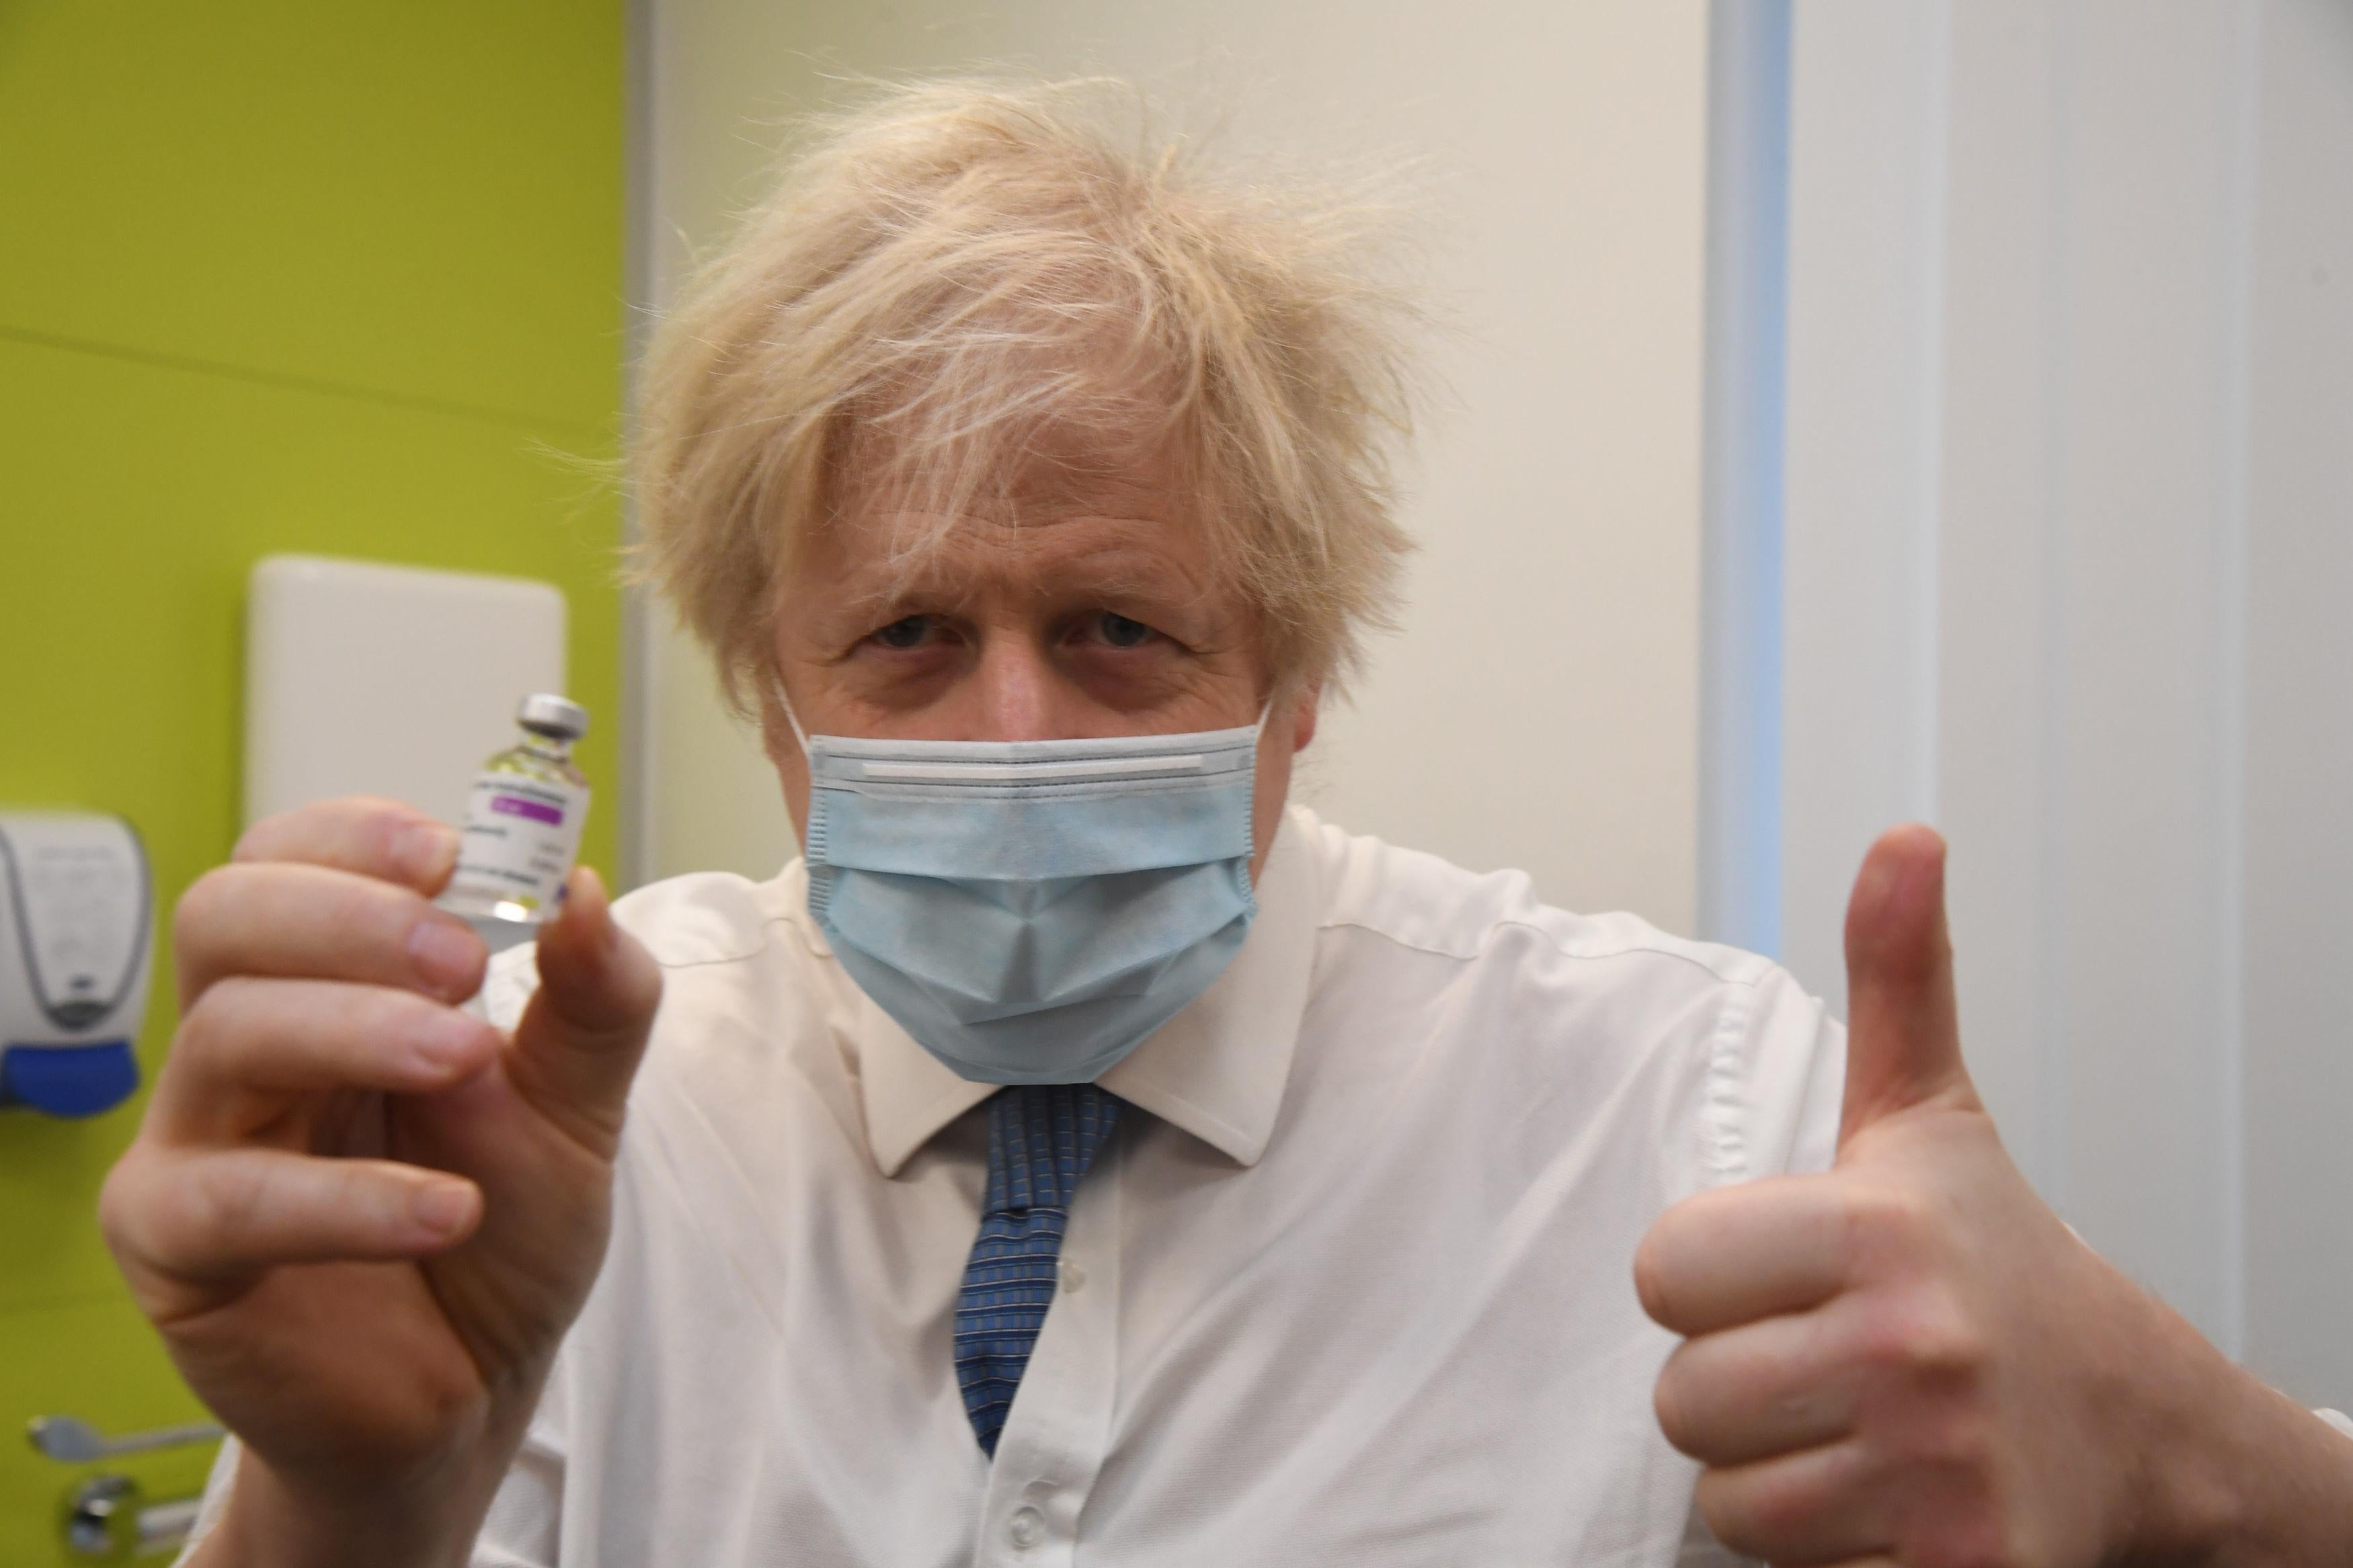 Boris Johnson gives a thumbs-up and holds up a vial of the AstraZeneca/Oxford COVID-19 vaccine.